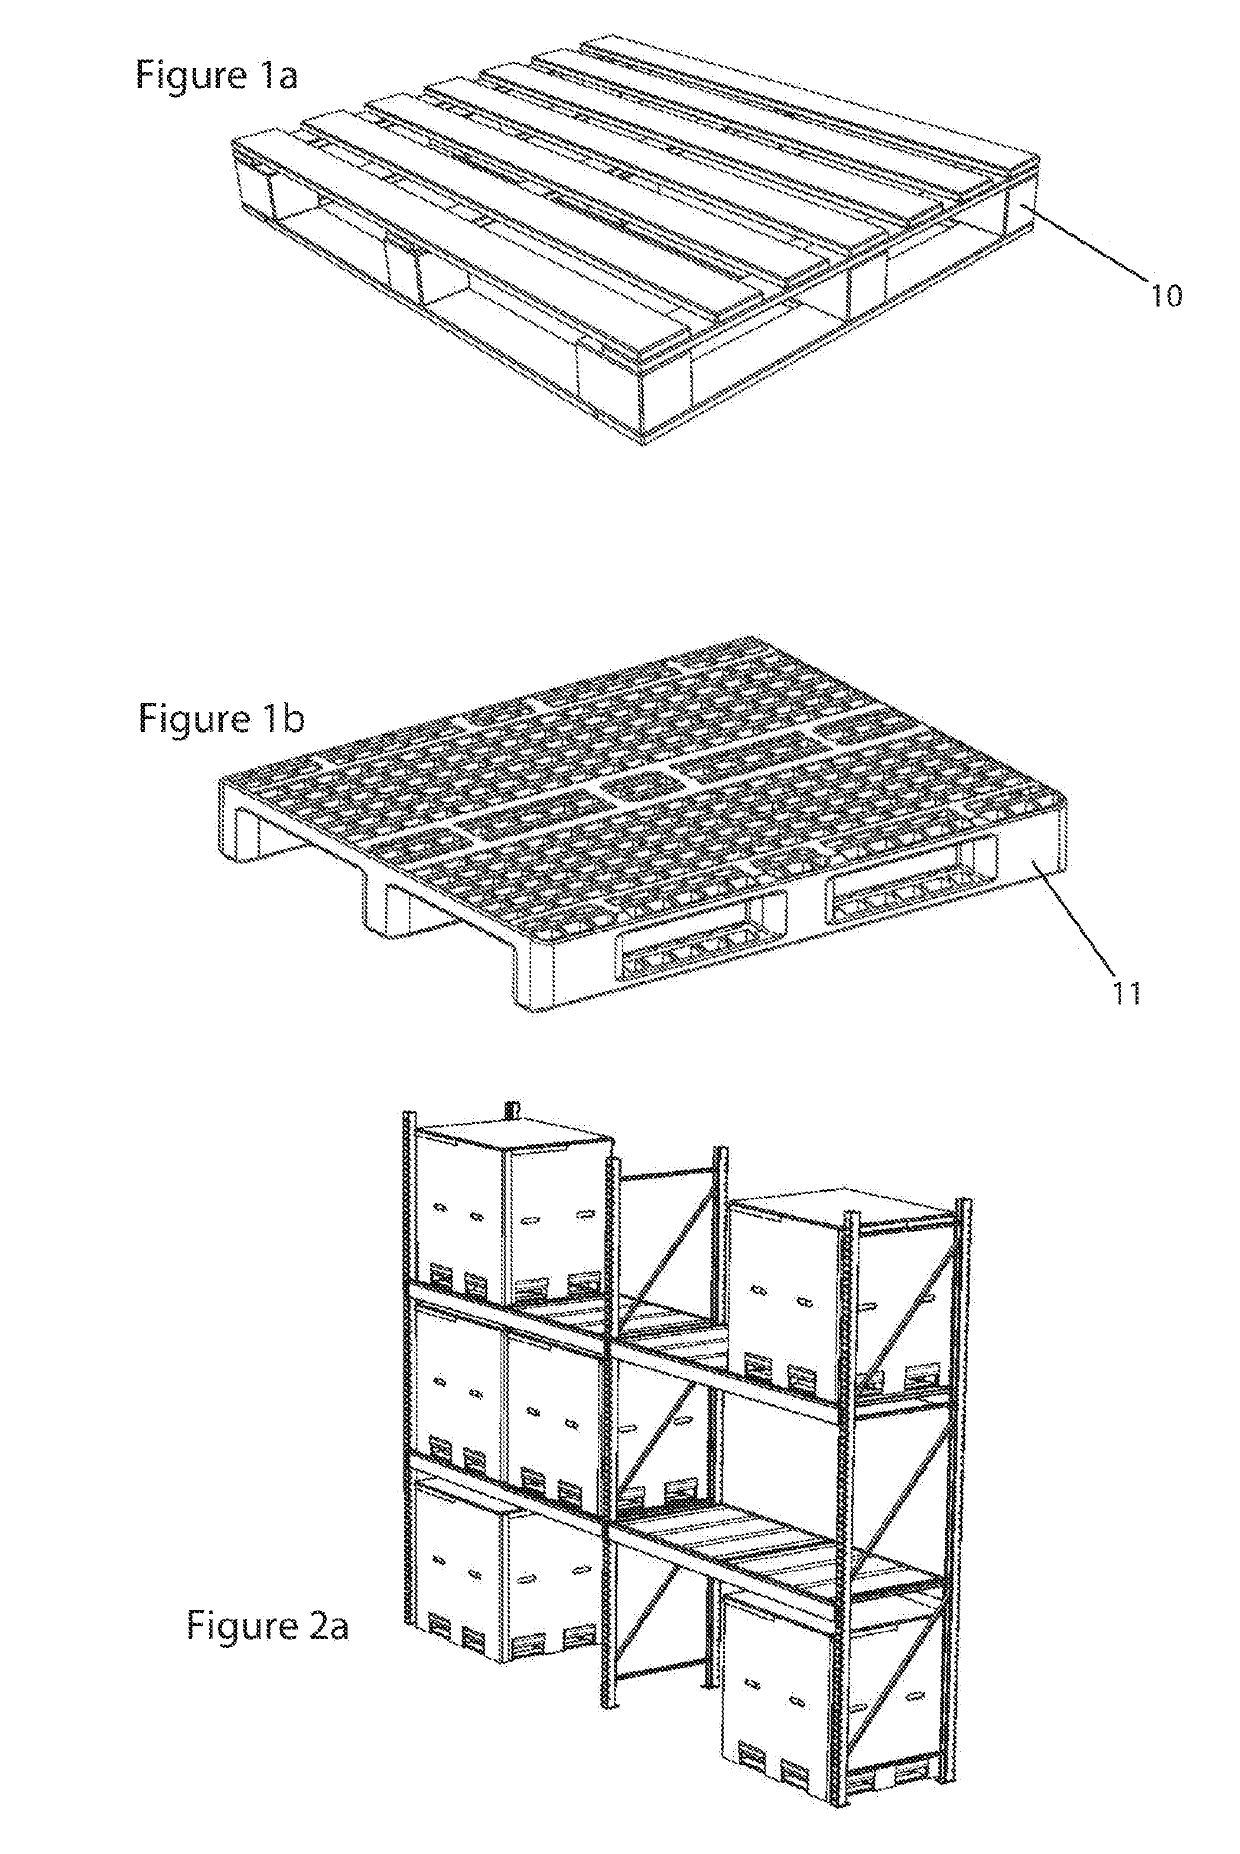 A Transport and Storage System